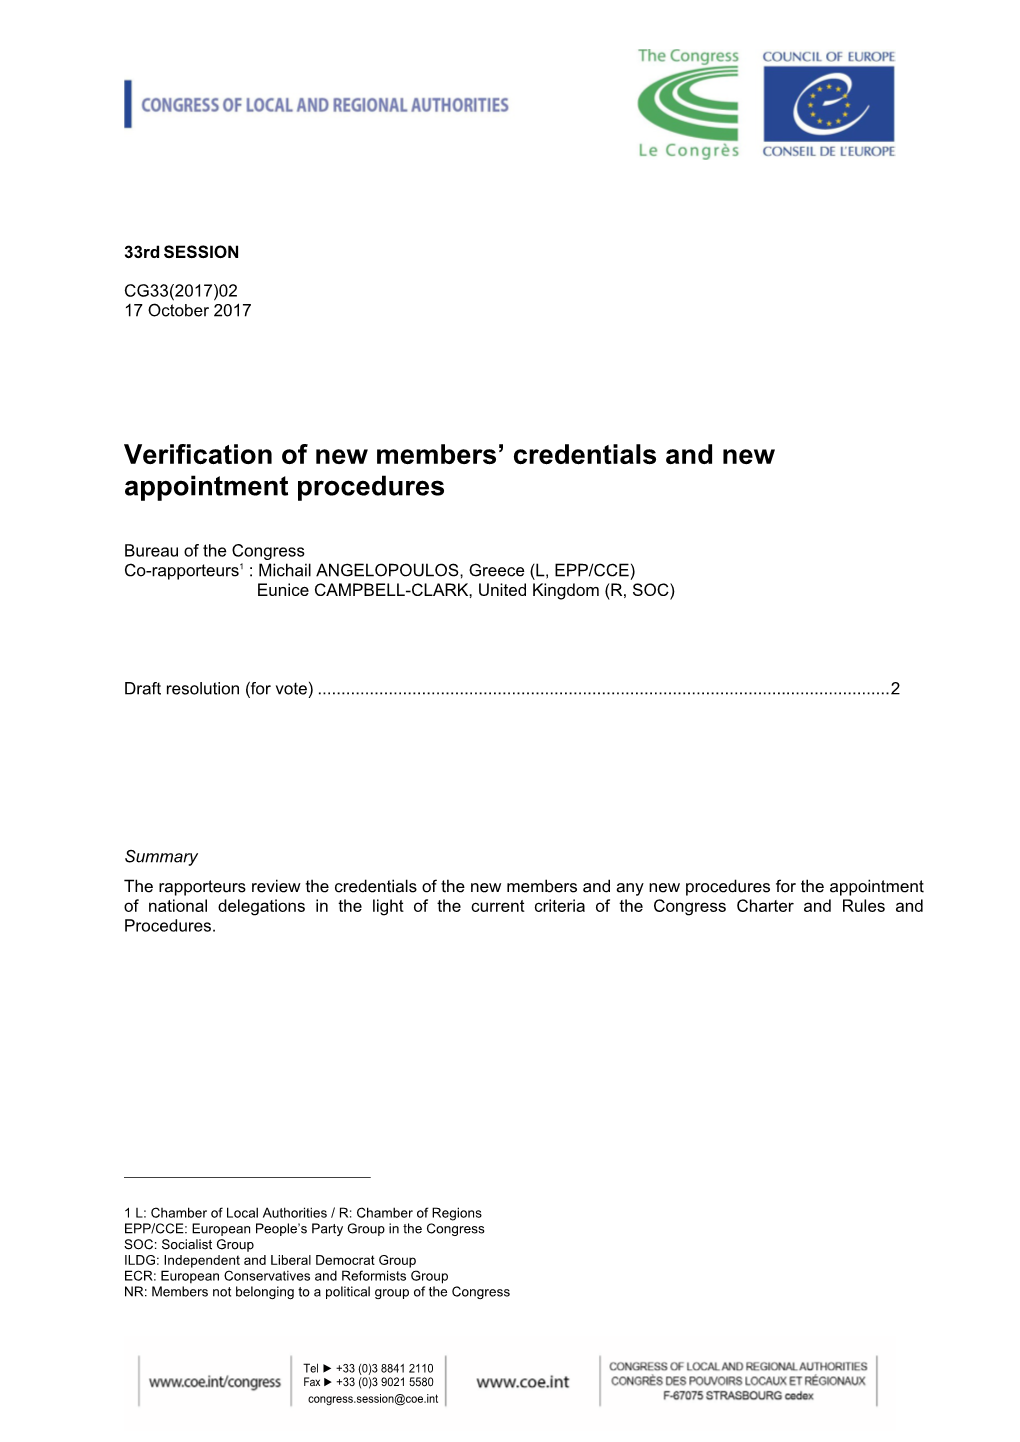 Verification of New Members' Credentials and New Appointment Procedures